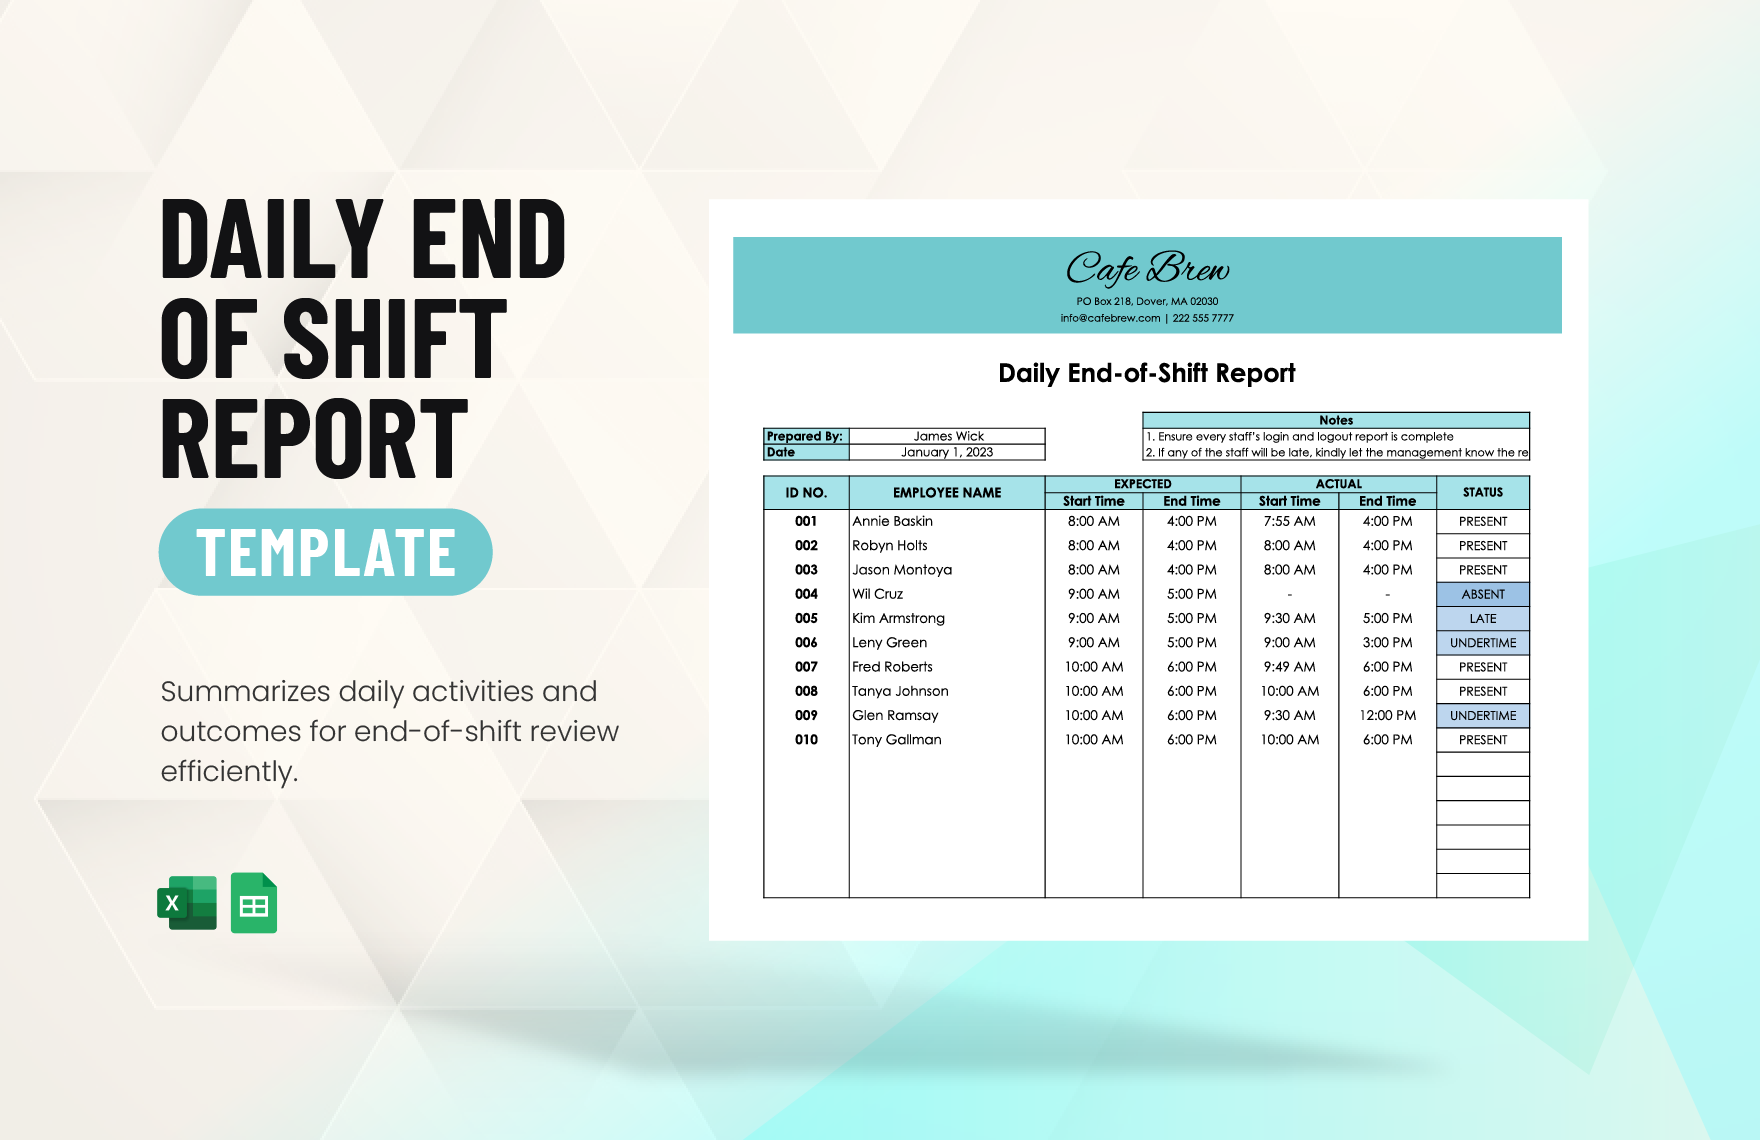 Daily End of Shift Report Template